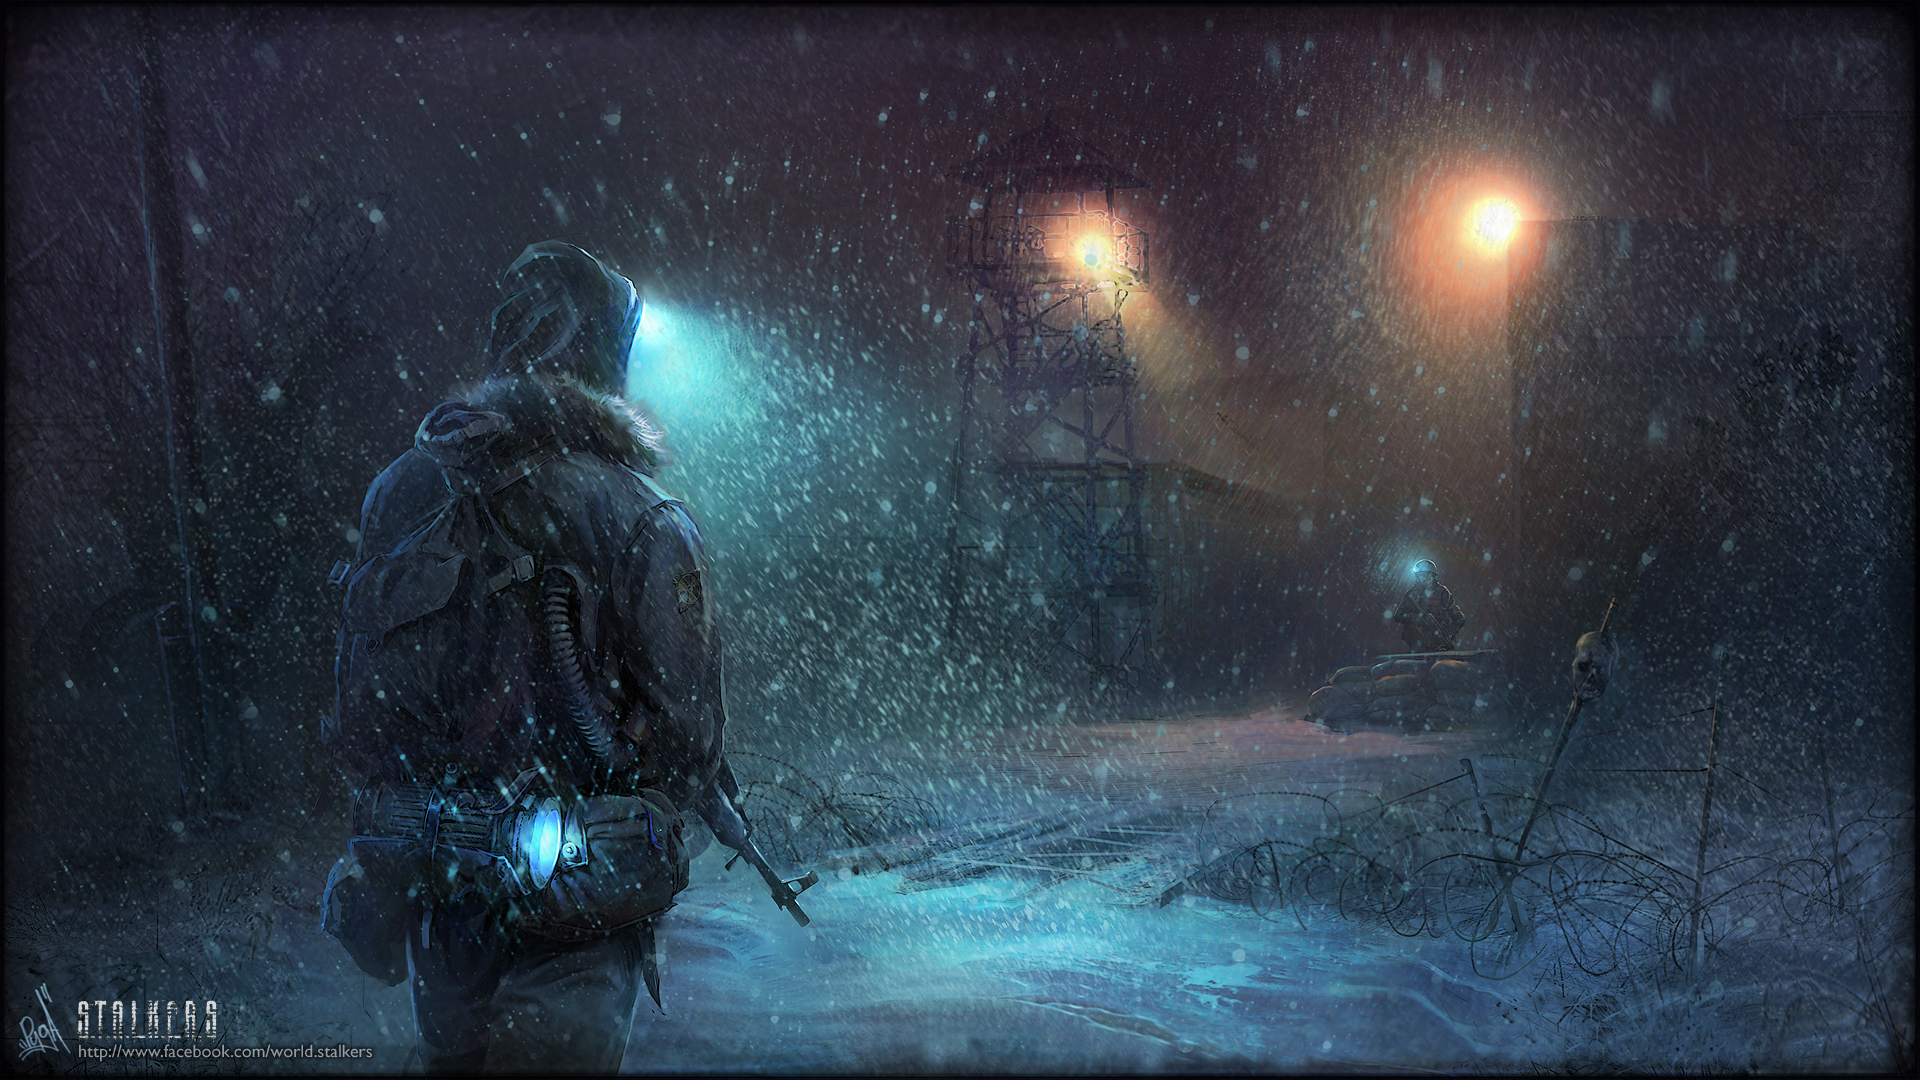 General 1920x1080 S.T.A.L.K.E.R. S.T.A.L.K.E.R.: Clear Sky snow assault rifle looking into the distance cold video games video game art winter lights